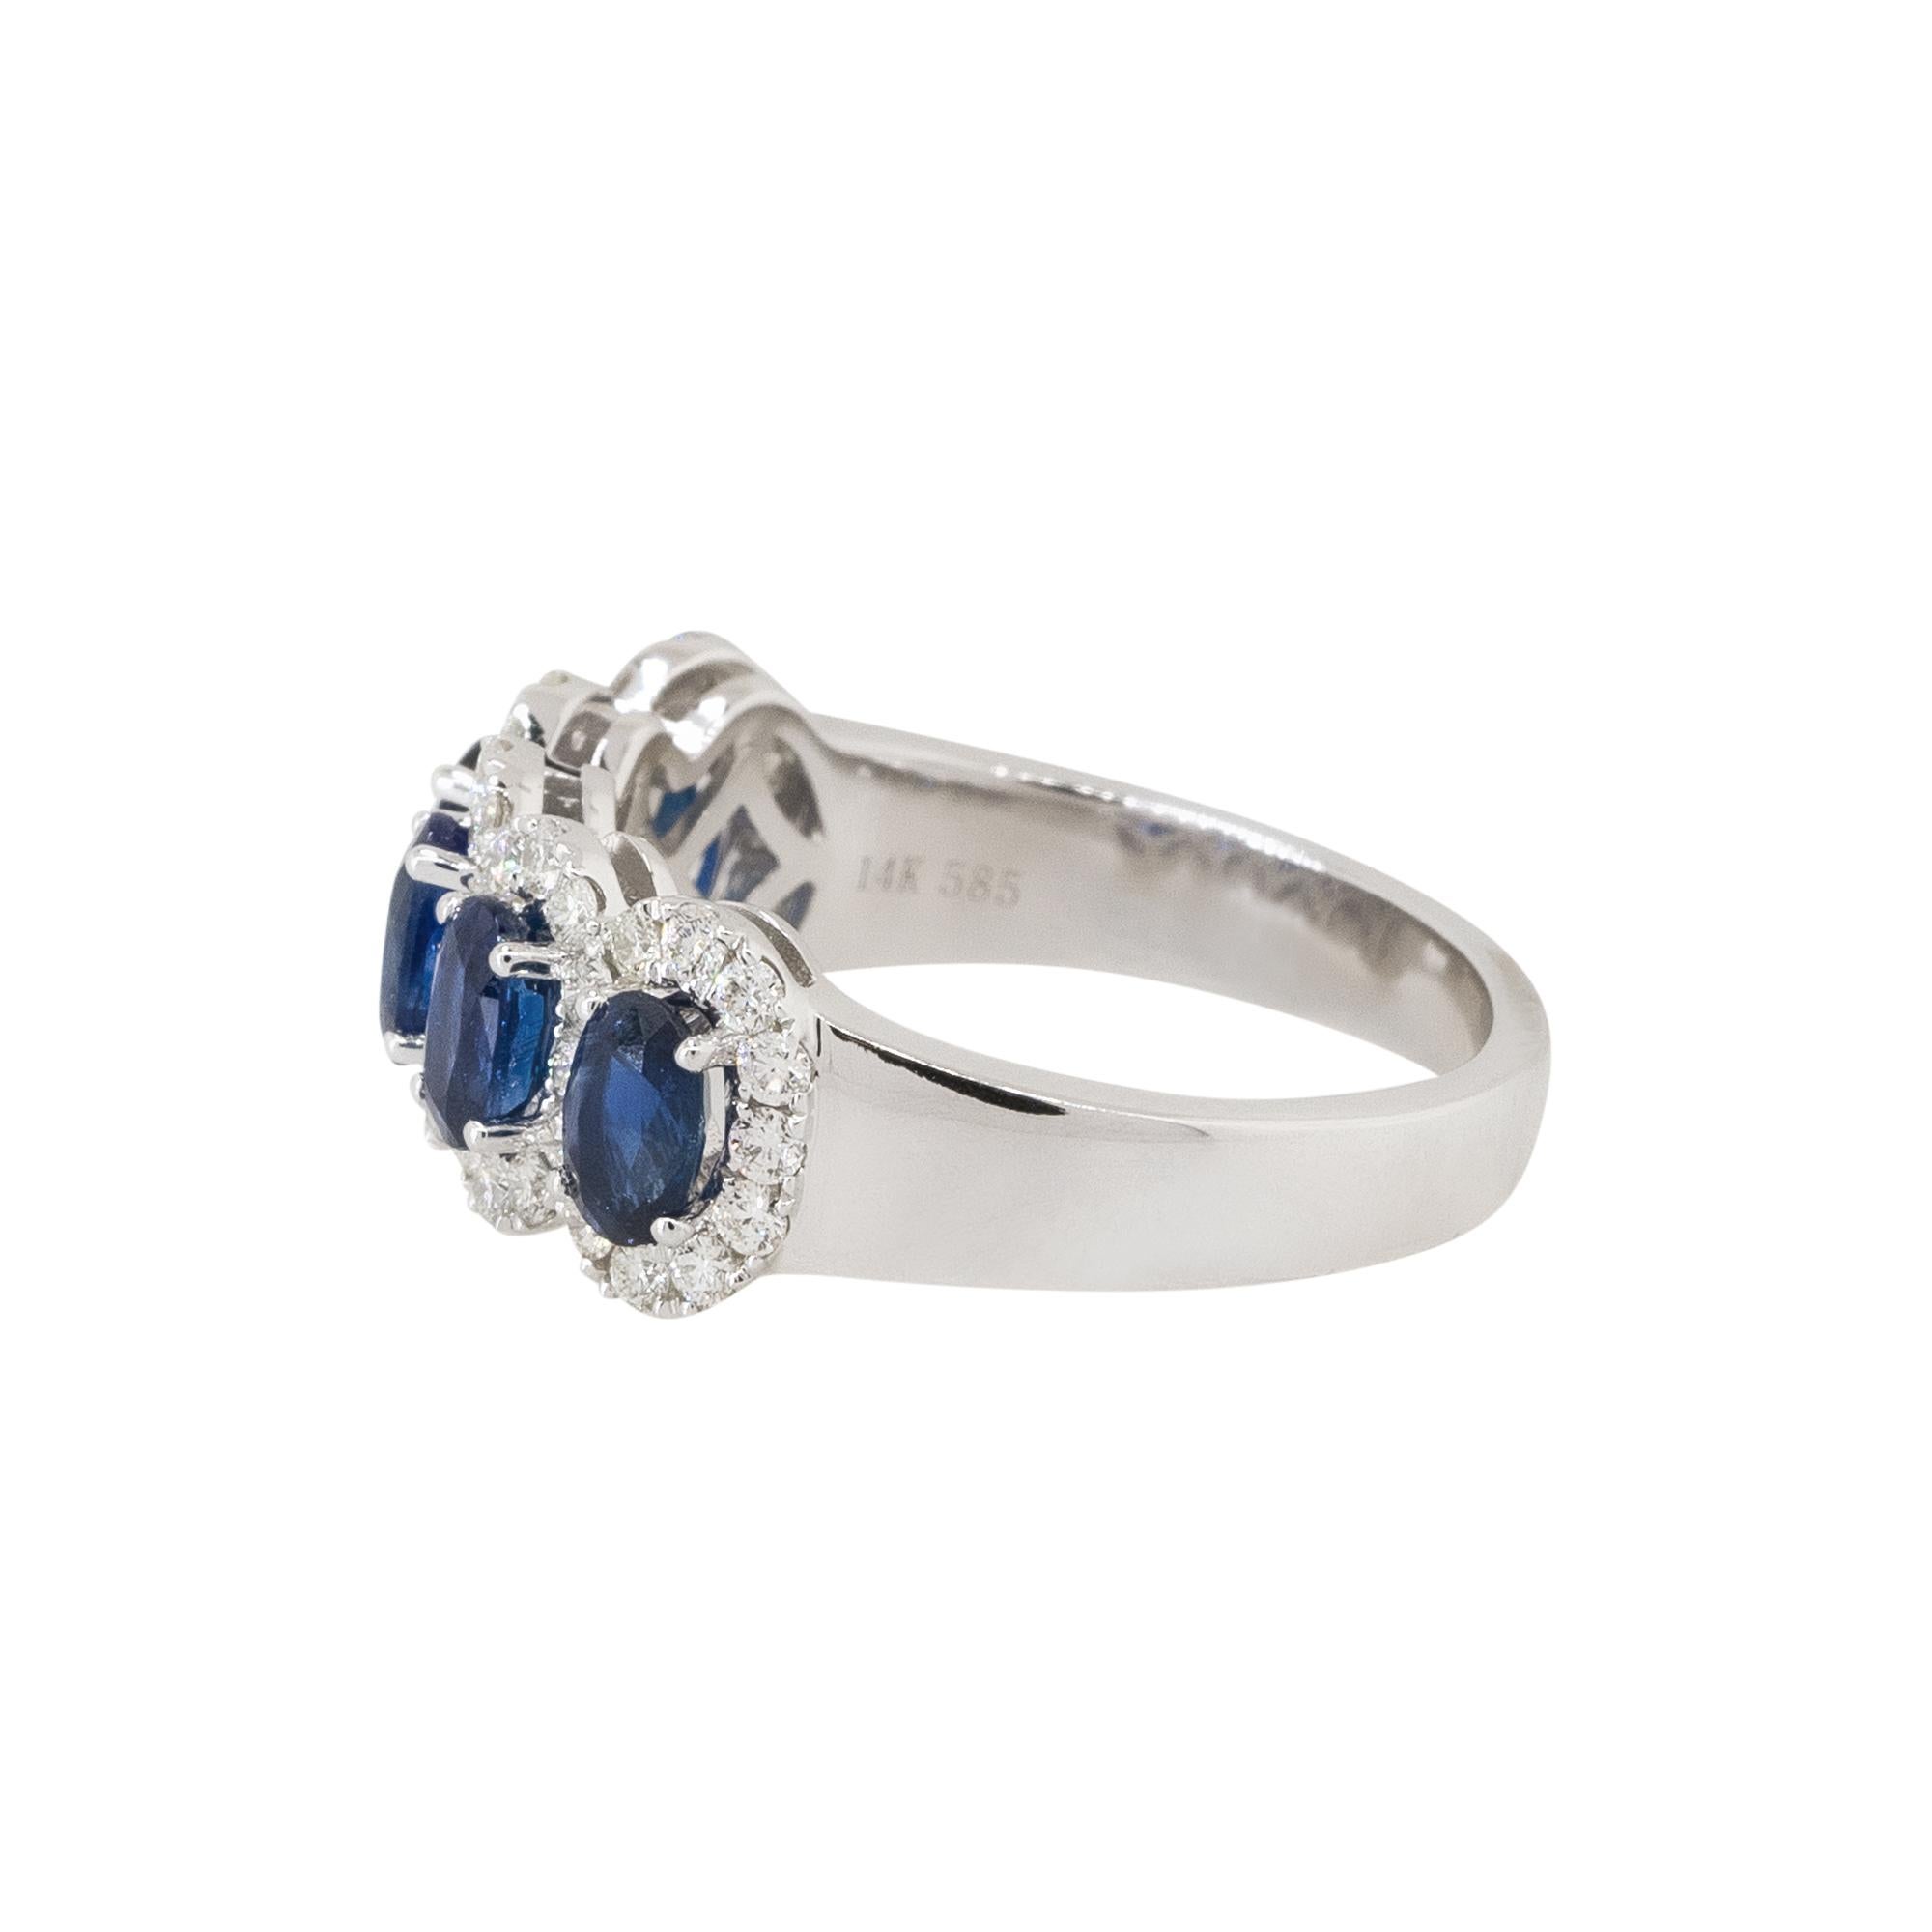 14k White Gold Oval Cut Sapphire & Diamond Halo Ring In Excellent Condition For Sale In Boca Raton, FL